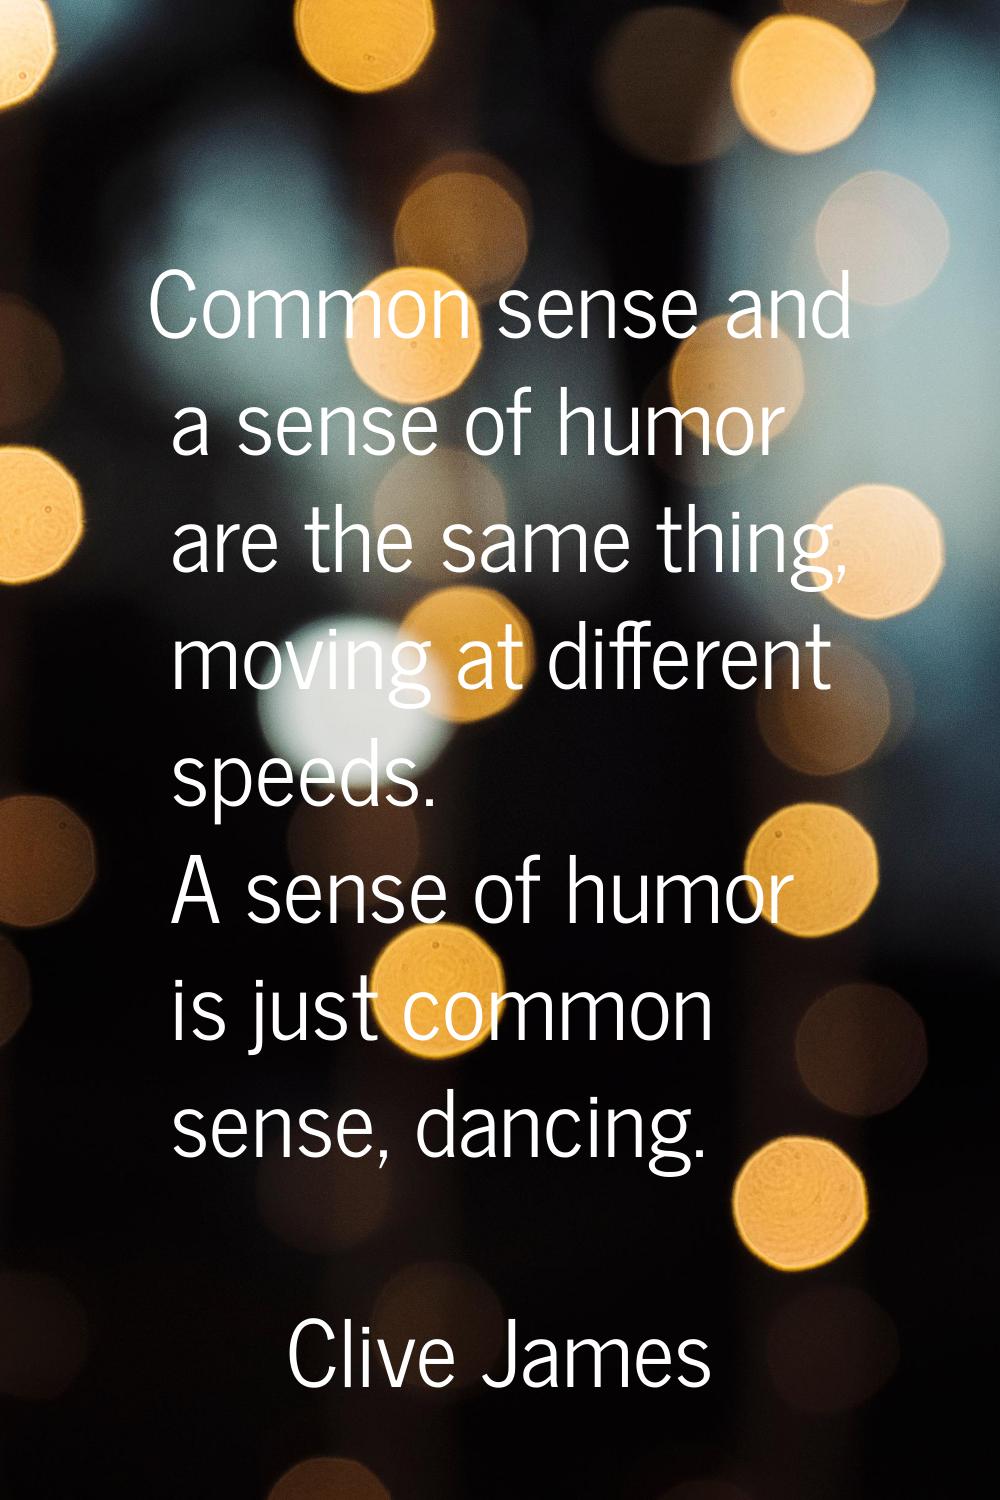 Common sense and a sense of humor are the same thing, moving at different speeds. A sense of humor 